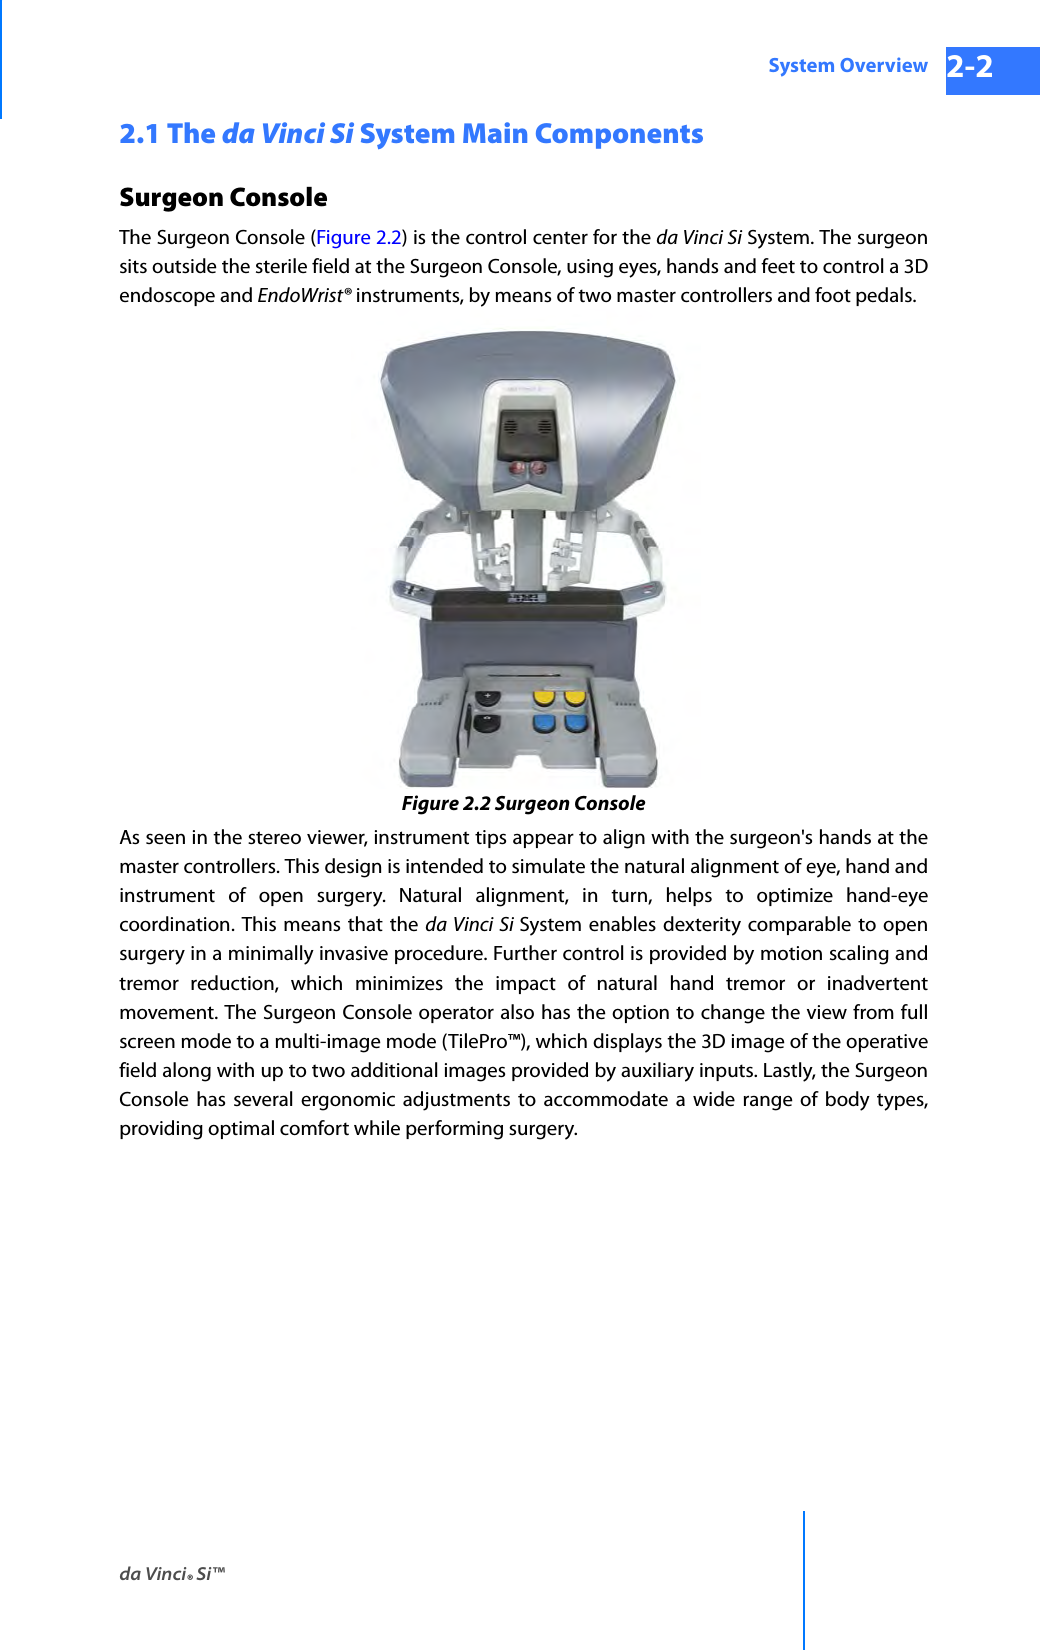 da Vinci® Si™System Overview 2-2DRAFT/PRE-RELEASE/CONFIDENTIAL 10/9/142.1 The da Vinci Si System Main Components Surgeon ConsoleThe Surgeon Console (Figure 2.2) is the control center for the da Vinci Si System. The surgeon sits outside the sterile field at the Surgeon Console, using eyes, hands and feet to control a 3D endoscope and EndoWrist® instruments, by means of two master controllers and foot pedals.Figure 2.2 Surgeon ConsoleAs seen in the stereo viewer, instrument tips appear to align with the surgeon&apos;s hands at the master controllers. This design is intended to simulate the natural alignment of eye, hand and instrument of open surgery. Natural alignment, in turn, helps to optimize hand-eye coordination. This means that the da Vinci Si System enables dexterity comparable to open surgery in a minimally invasive procedure. Further control is provided by motion scaling and tremor reduction, which minimizes the impact of natural hand tremor or inadvertent movement. The Surgeon Console operator also has the option to change the view from full screen mode to a multi-image mode (TilePro™), which displays the 3D image of the operative field along with up to two additional images provided by auxiliary inputs. Lastly, the Surgeon Console has several ergonomic adjustments to accommodate a wide range of body types, providing optimal comfort while performing surgery.